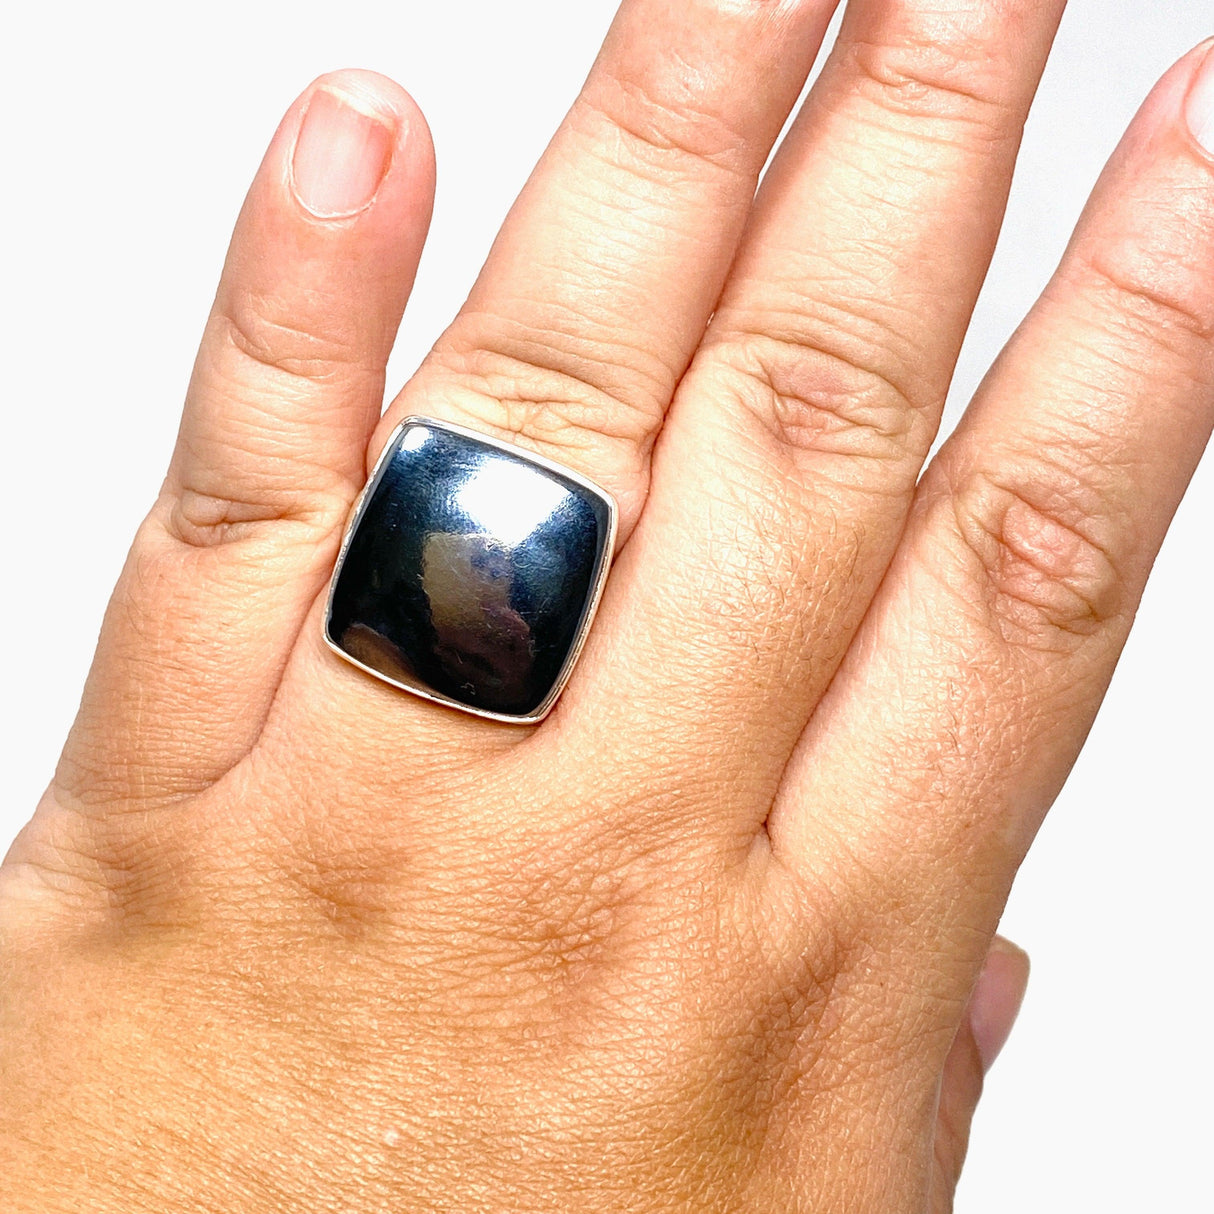 Terahertz (Silica) Square Ring with a Brushed Band Size 11 KRGJ3262 - Nature's Magick